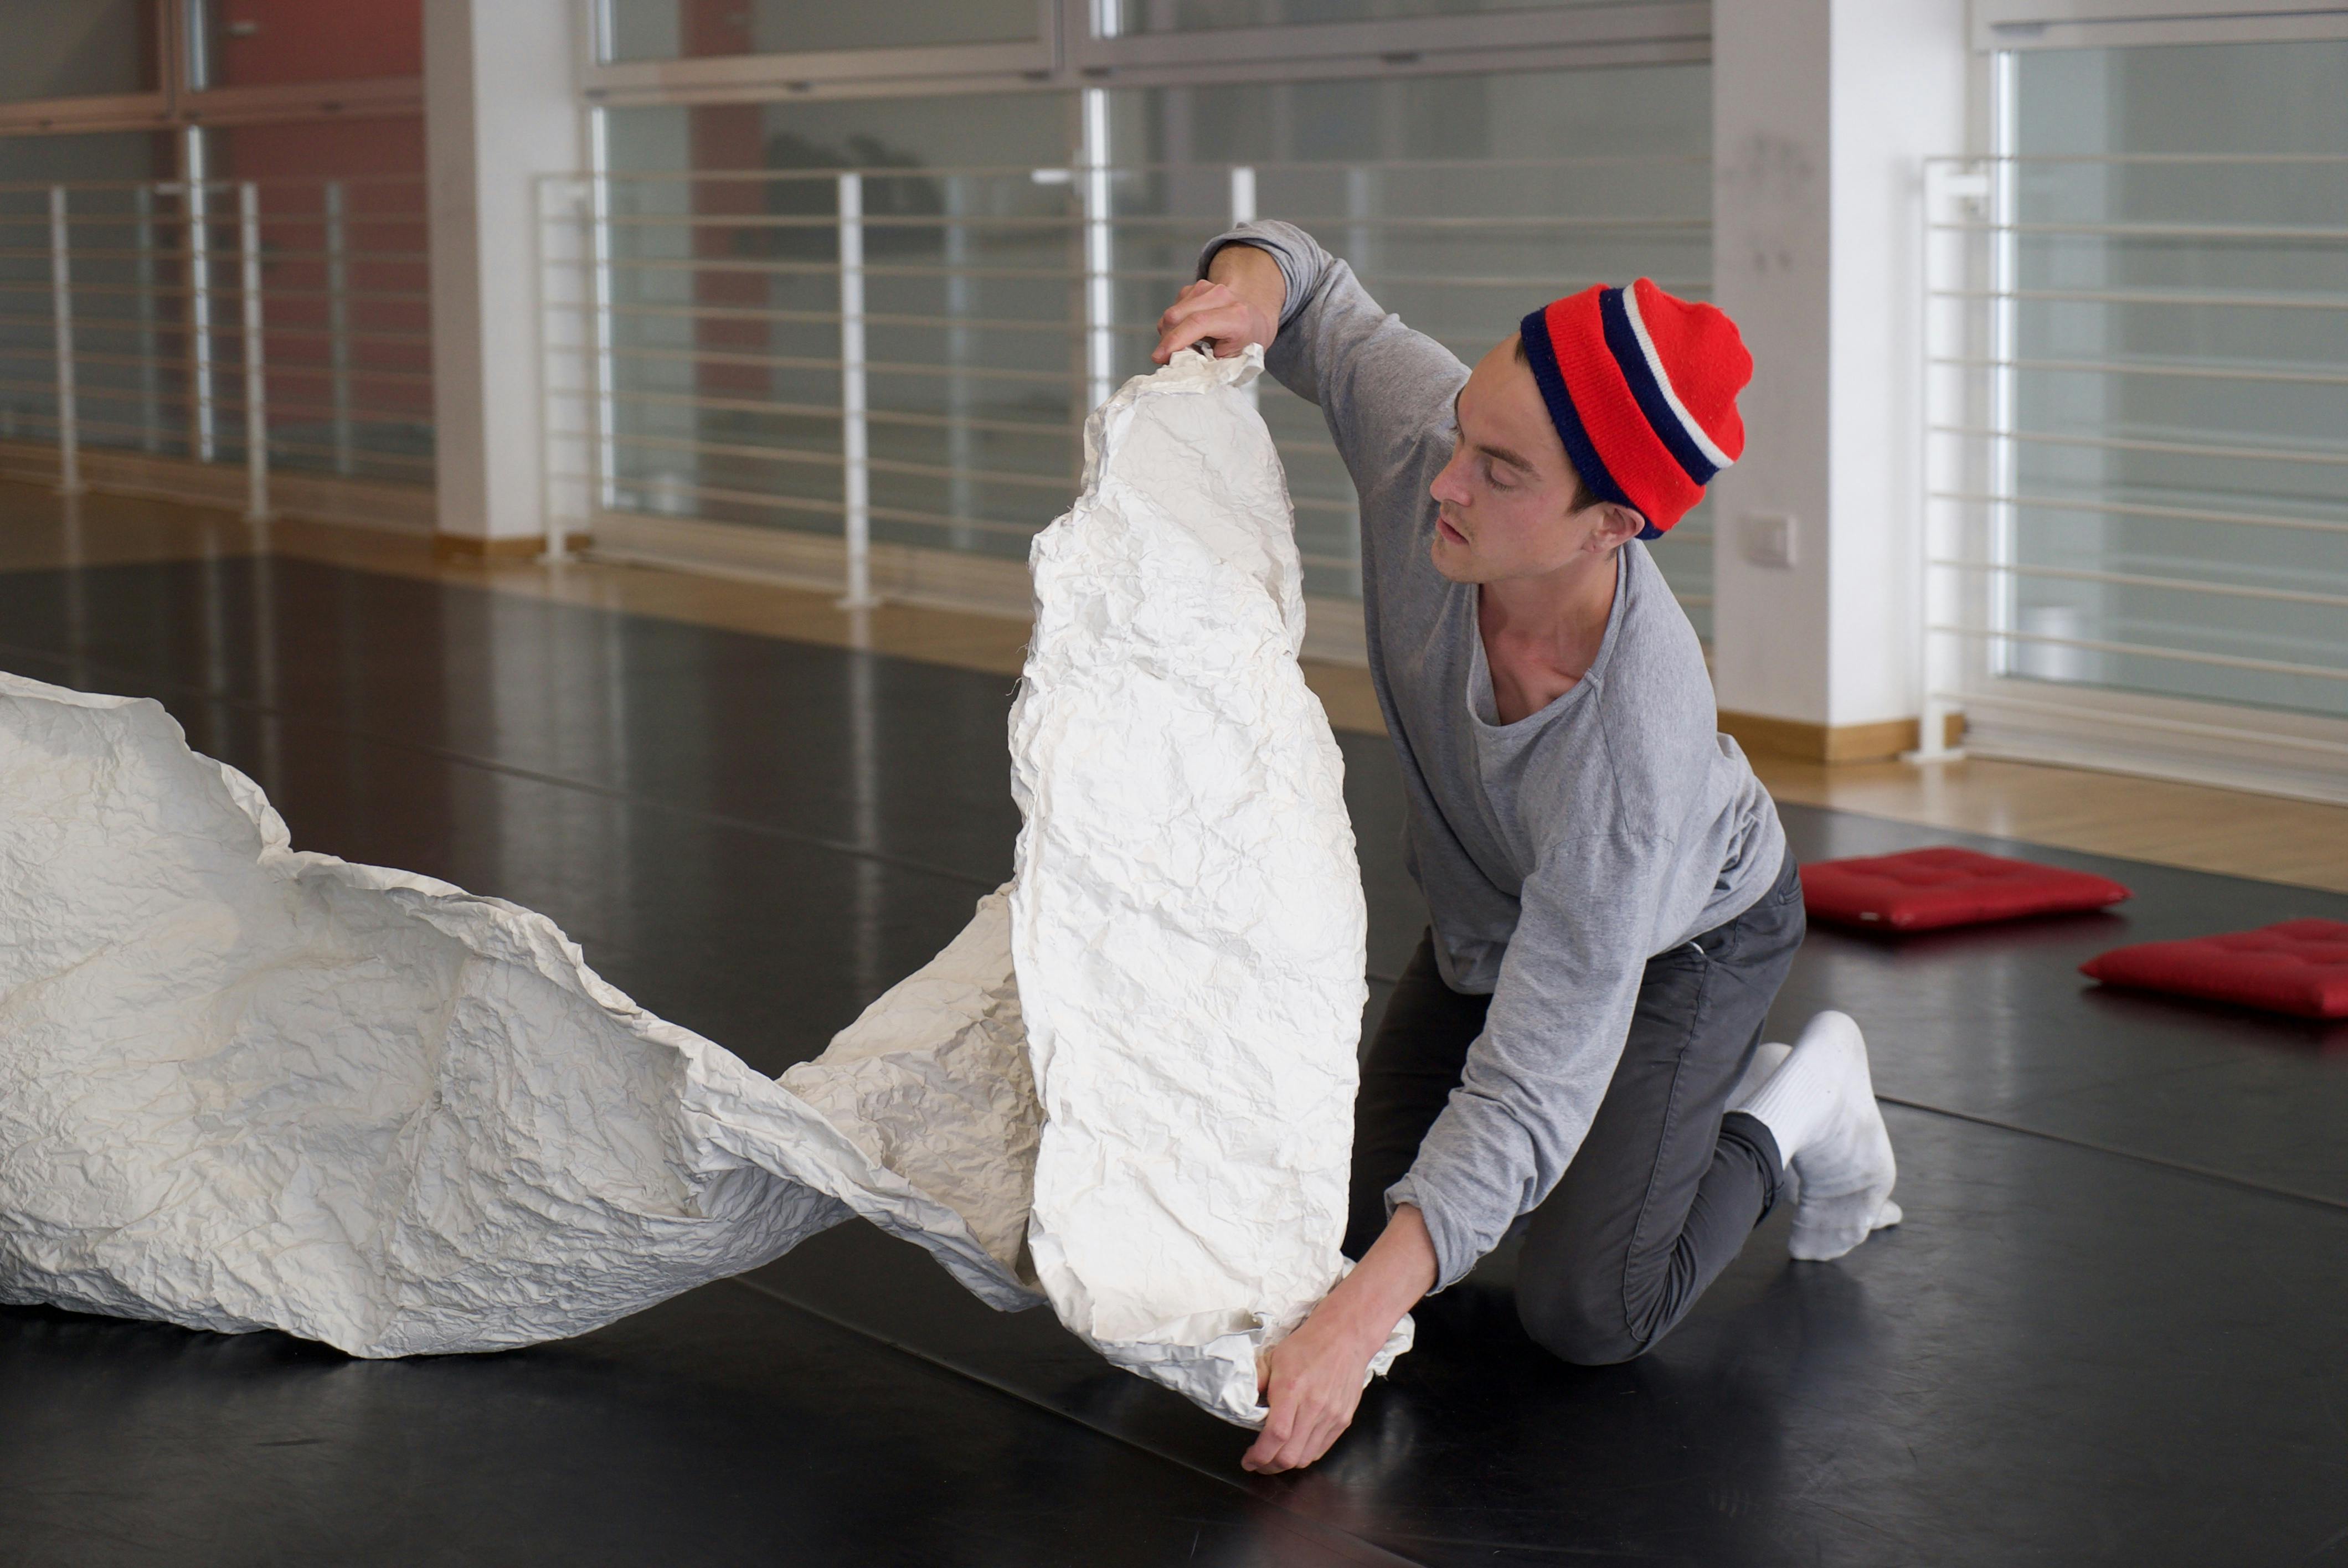 Sindri Runudde during an open rehearsal in the Studio. He is wearing a colorful woolen cap, is kneeled on the ground; he holds the edge of a long strip of crumpled white paper in his hands.